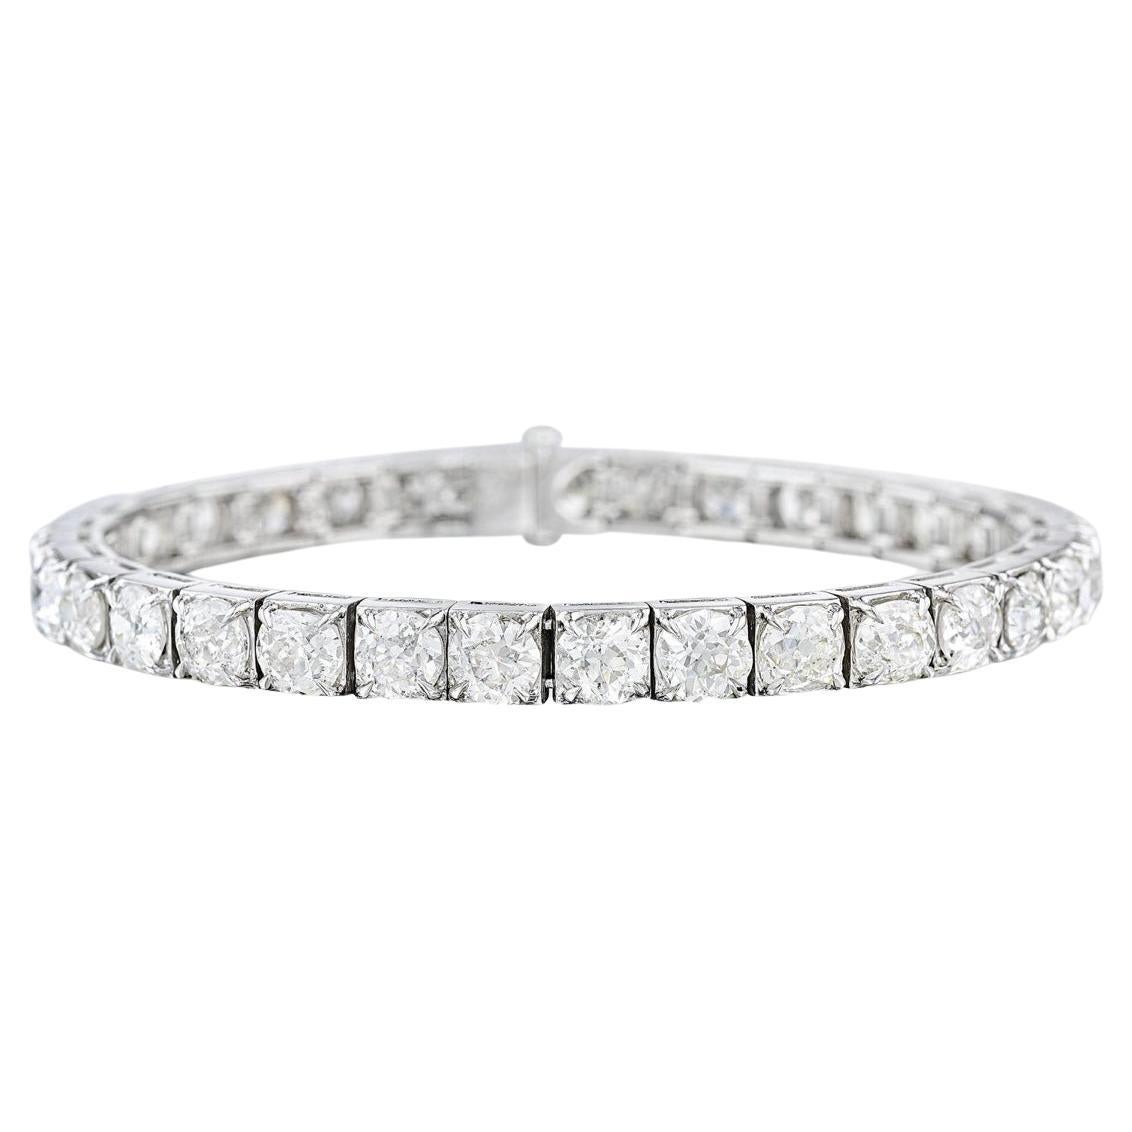 This gorgeous bracelet is crafted in platinum with old European cut and old cut diamonds, weighing a total of  14.67 carats most with H - J color and VS1 to SI2 clarity. 

Diamond weight : 14.67 carat 
Clarity : VS1 - SI2 
Color: H - J 
Measurements